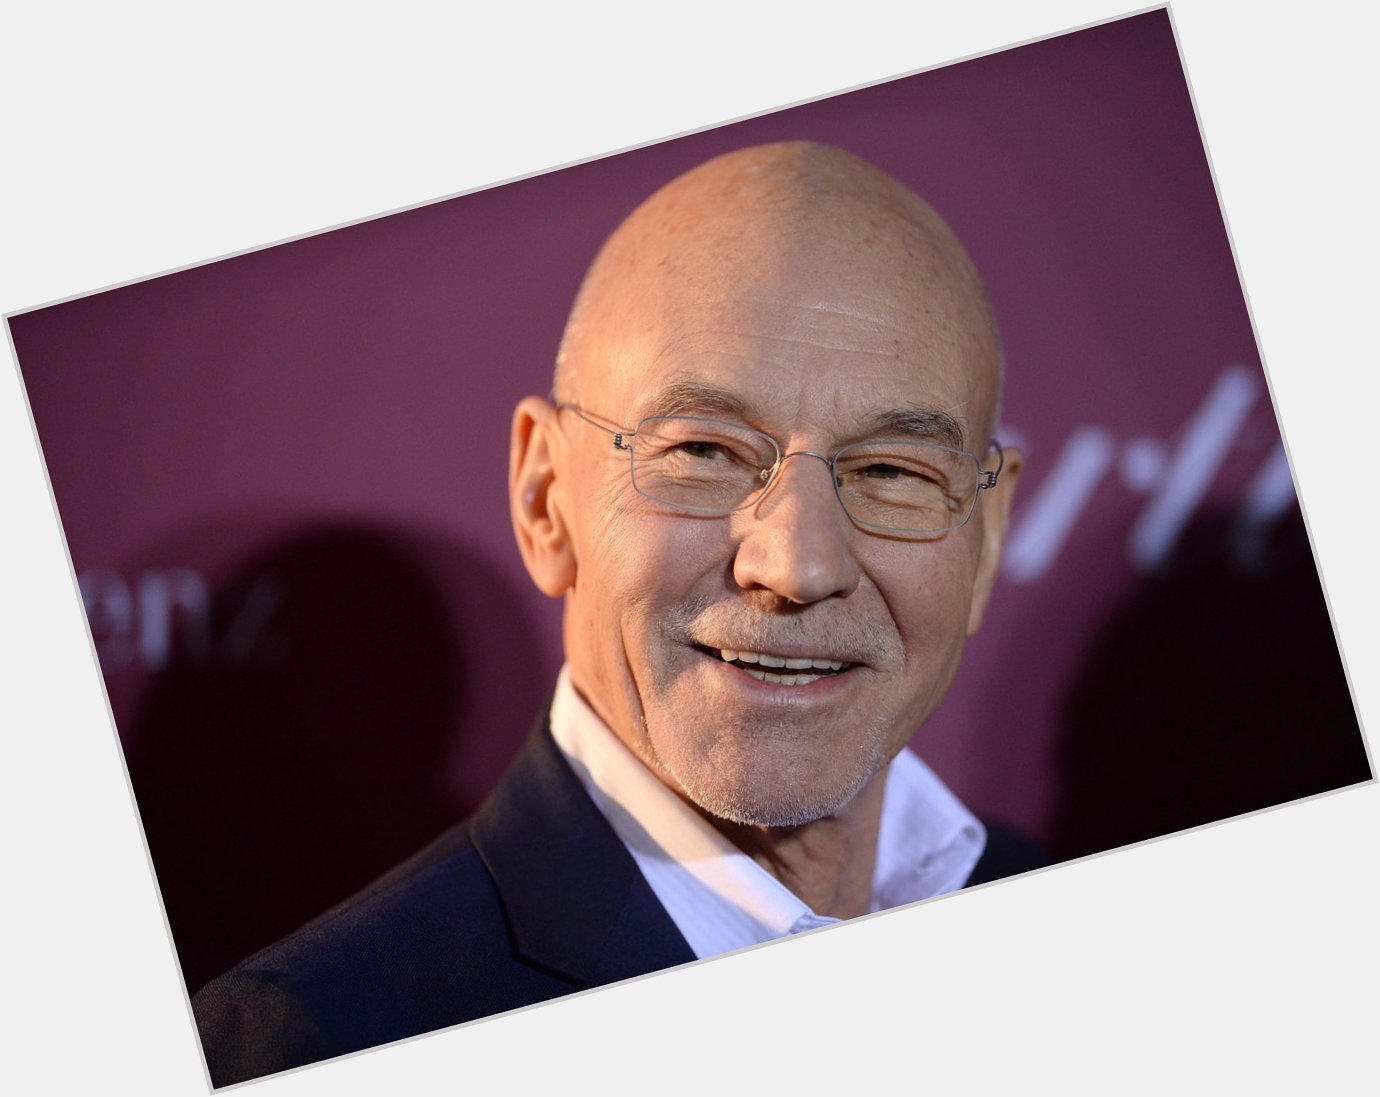 Happy 77th birthday to Sir Patrick Stewart!

John Brunning has some music to celebrate very soon on 